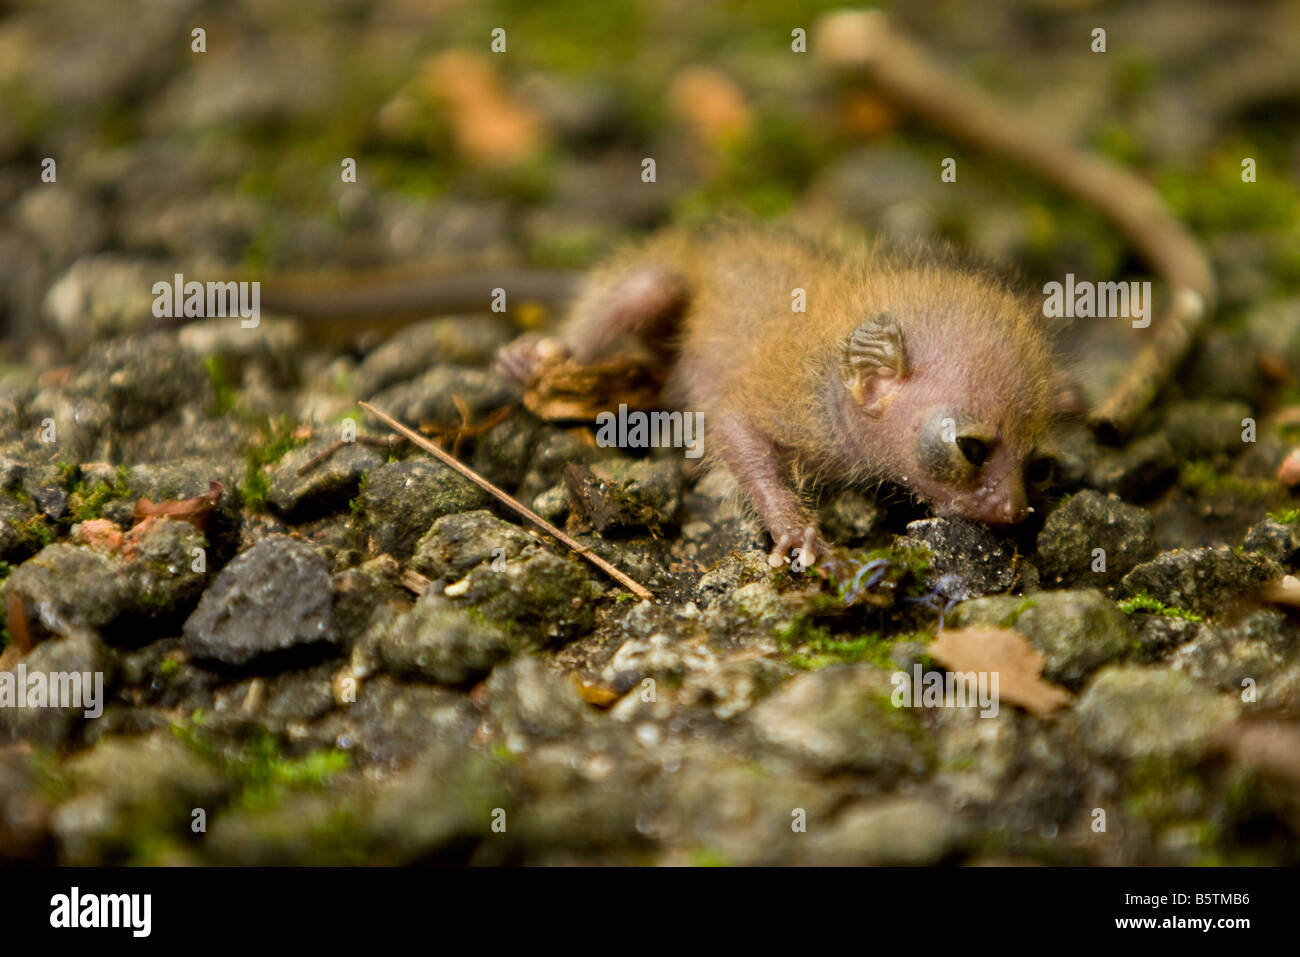 What is believed to be an infant galago or bushbaby fallen to the ground in Togo, West Africa. Stock Photo